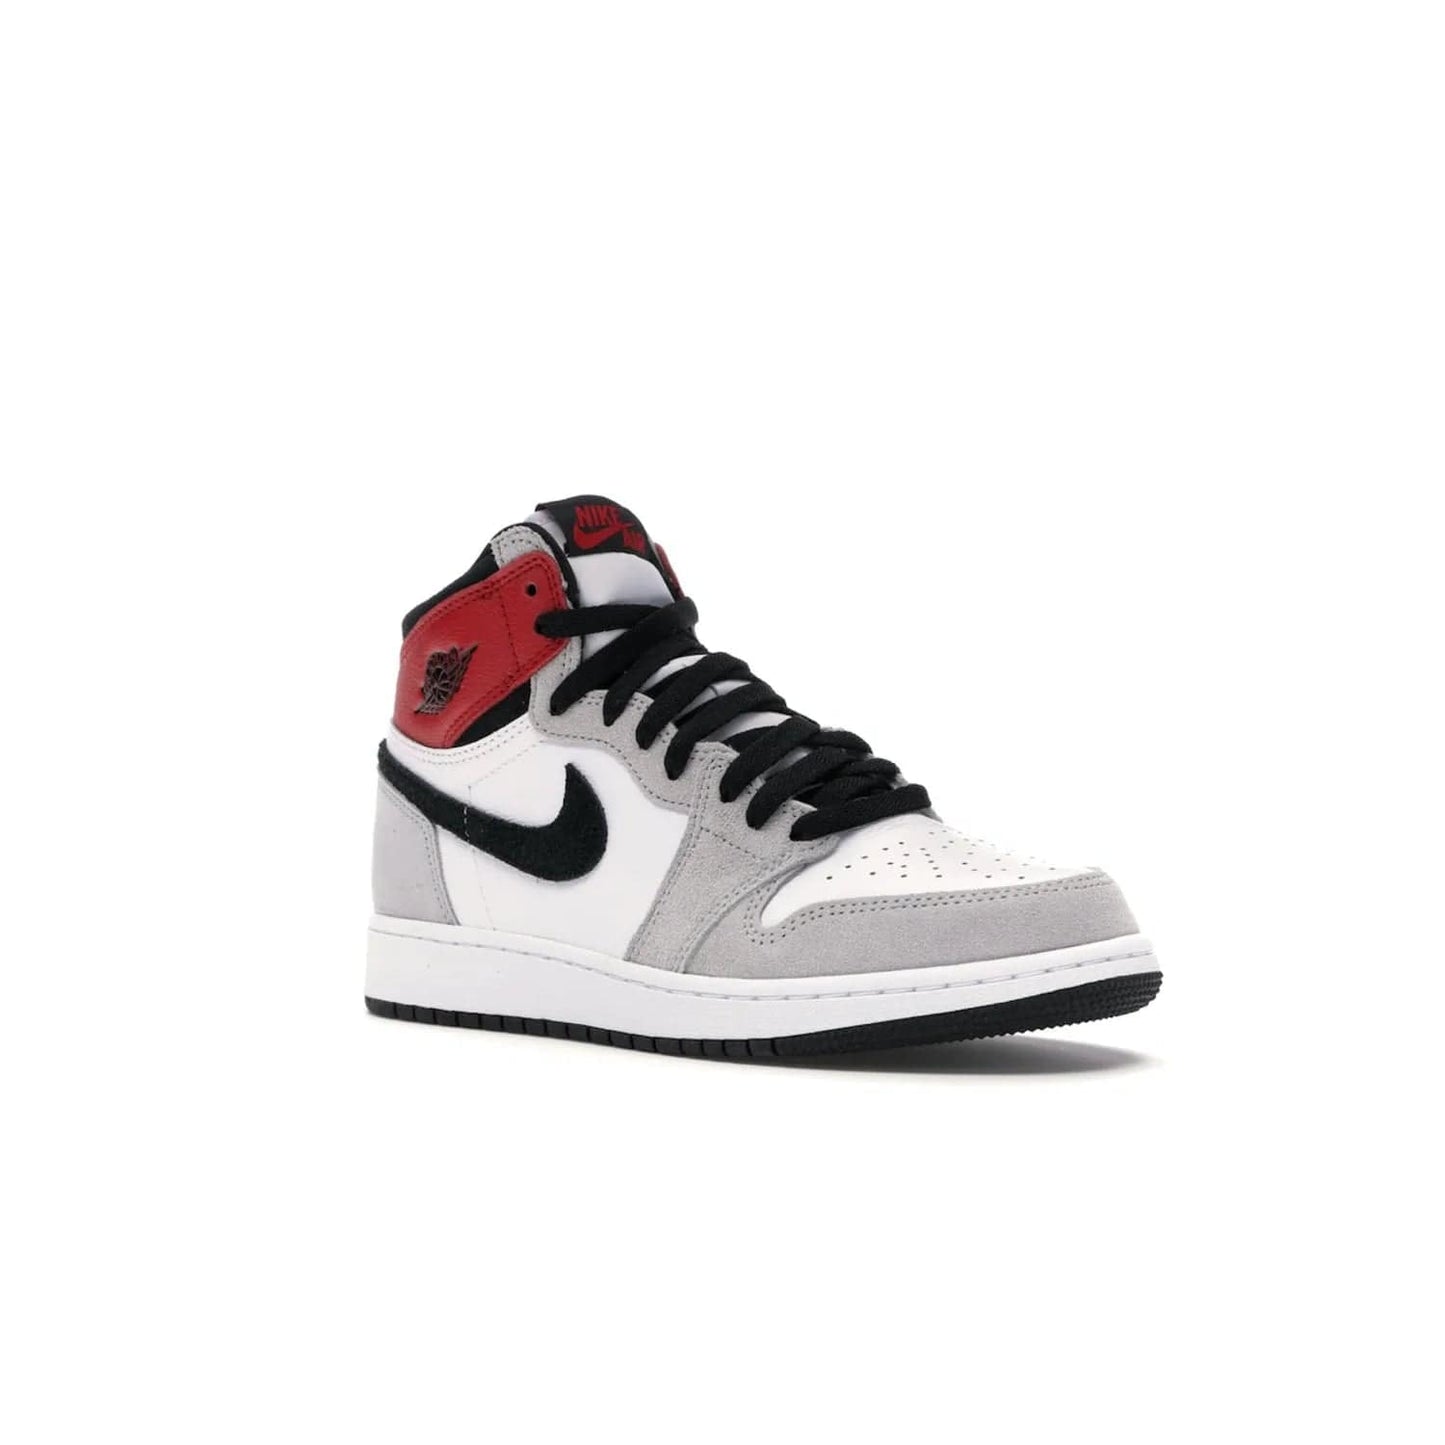 Jordan 1 Retro High Light Smoke Grey (GS) - Image 5 - Only at www.BallersClubKickz.com - Jordan 1 Retro High Light Smoke Grey (GS) features shades of grey, black, and Varsity Red with a bold silhouette. Premium white leather and suede overlays create a unique look. Released July 2020, offering style and performance. Perfect sneaker for any collector or fan.